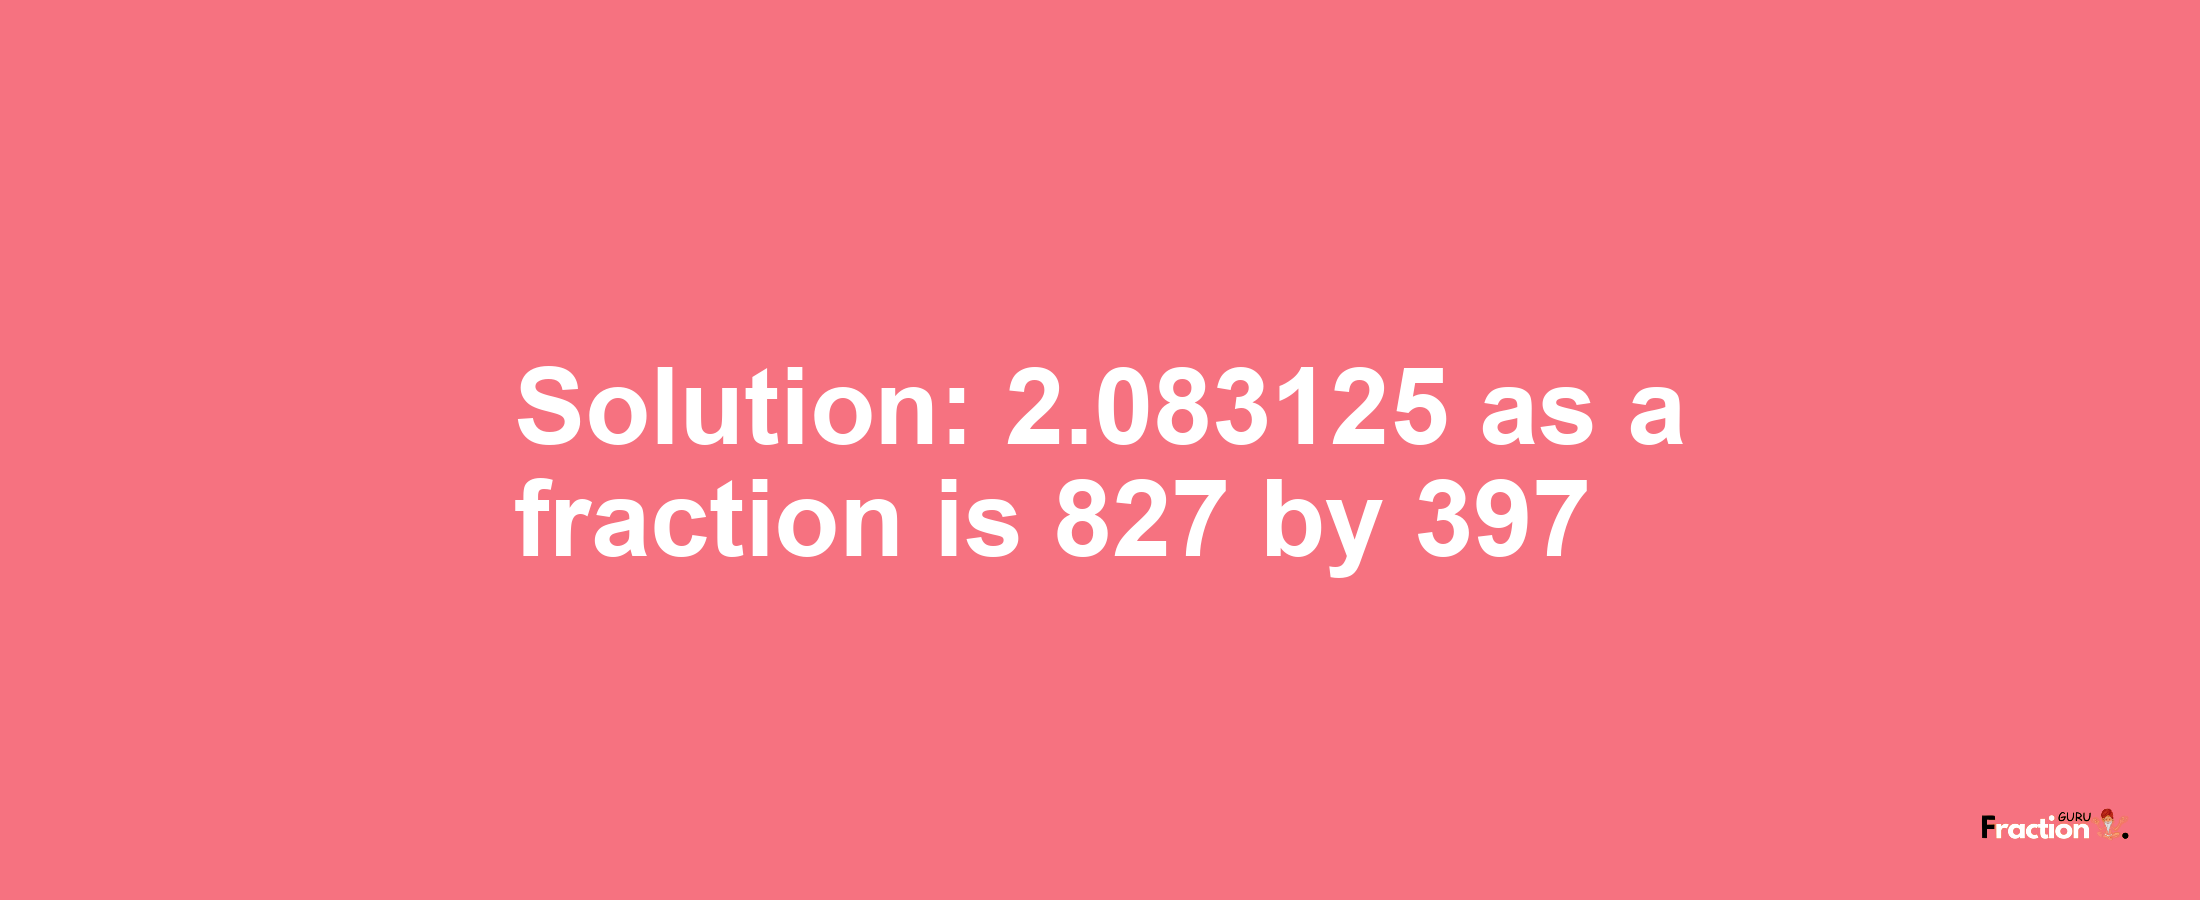 Solution:2.083125 as a fraction is 827/397